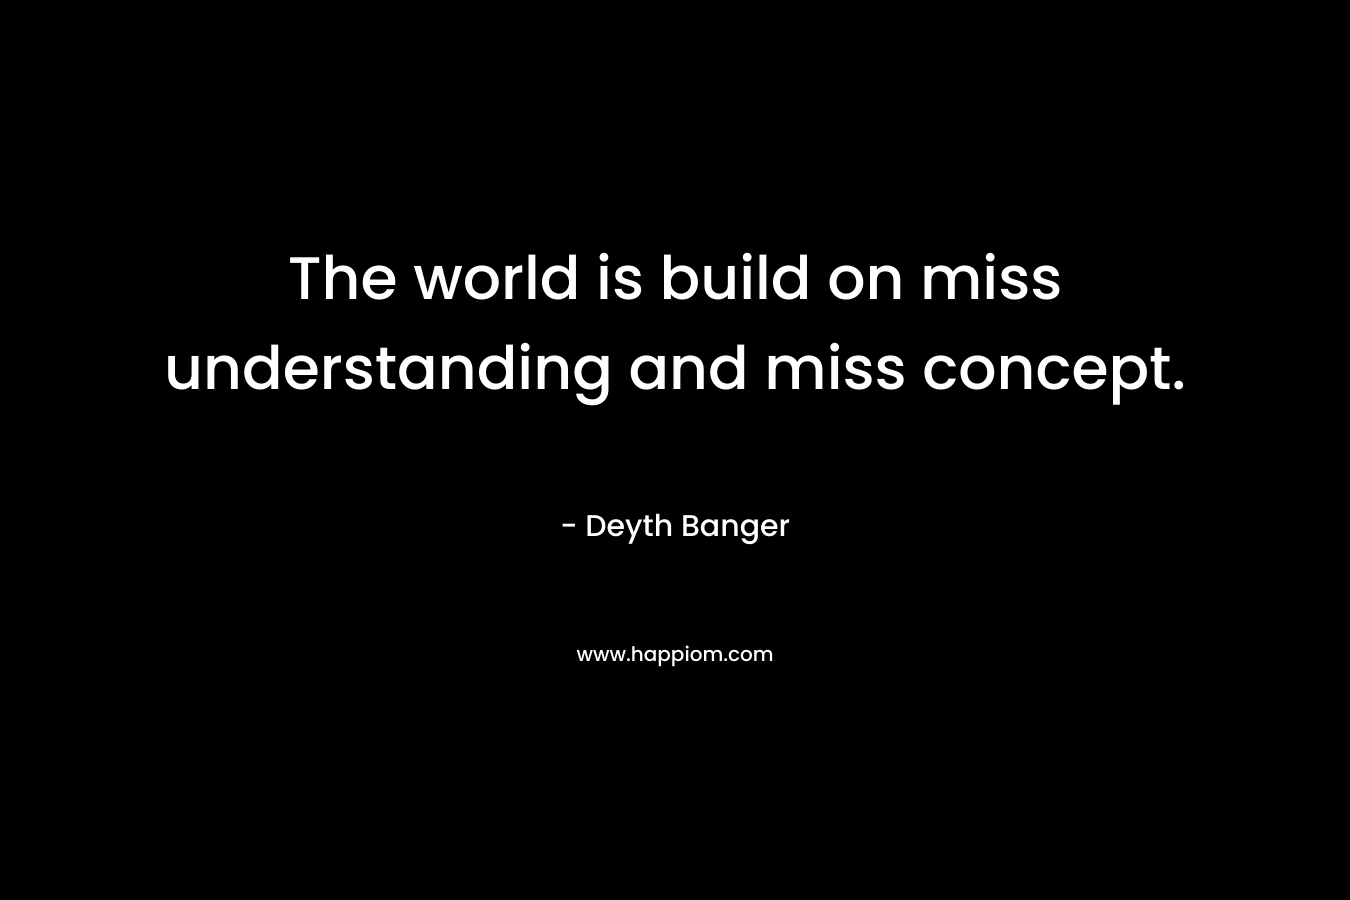 The world is build on miss understanding and miss concept.